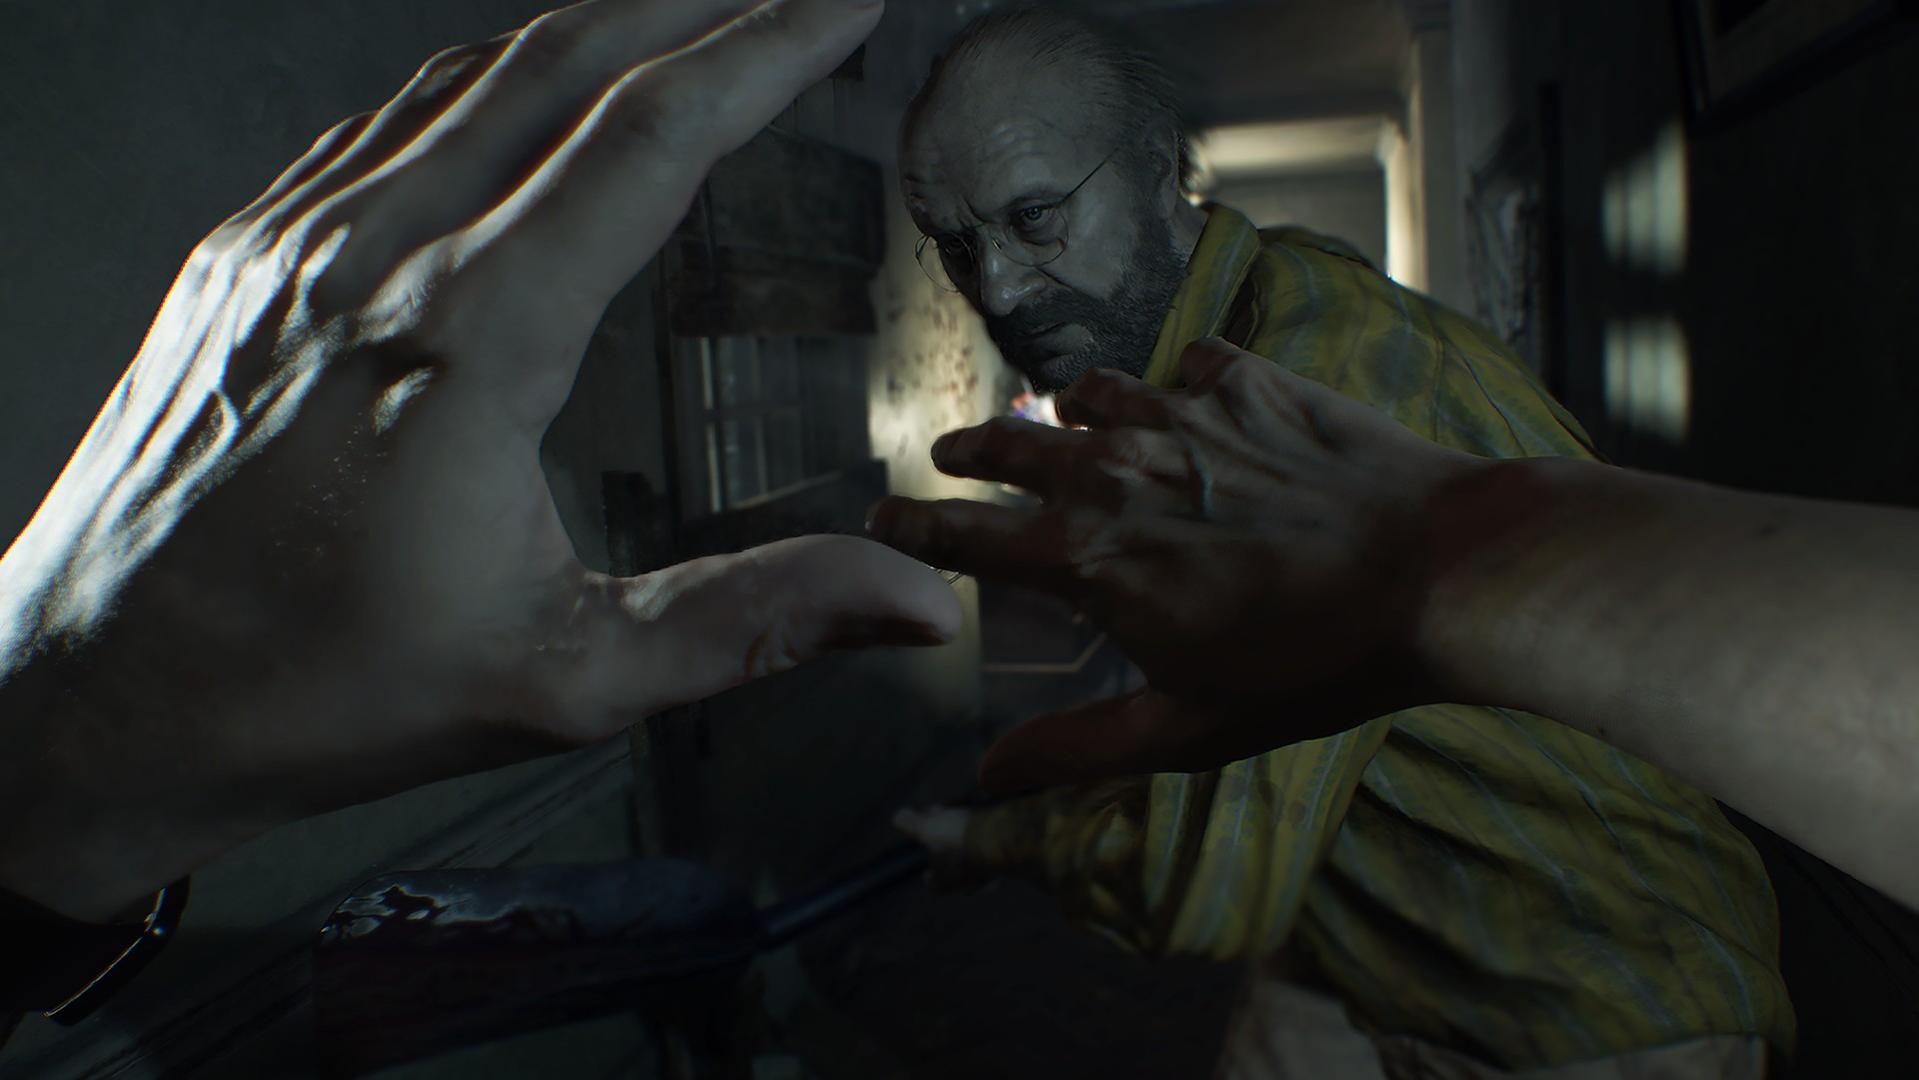 Resident Evil 7 takes the Capcom franchise back to its horror roots, but with a first-person perspective.